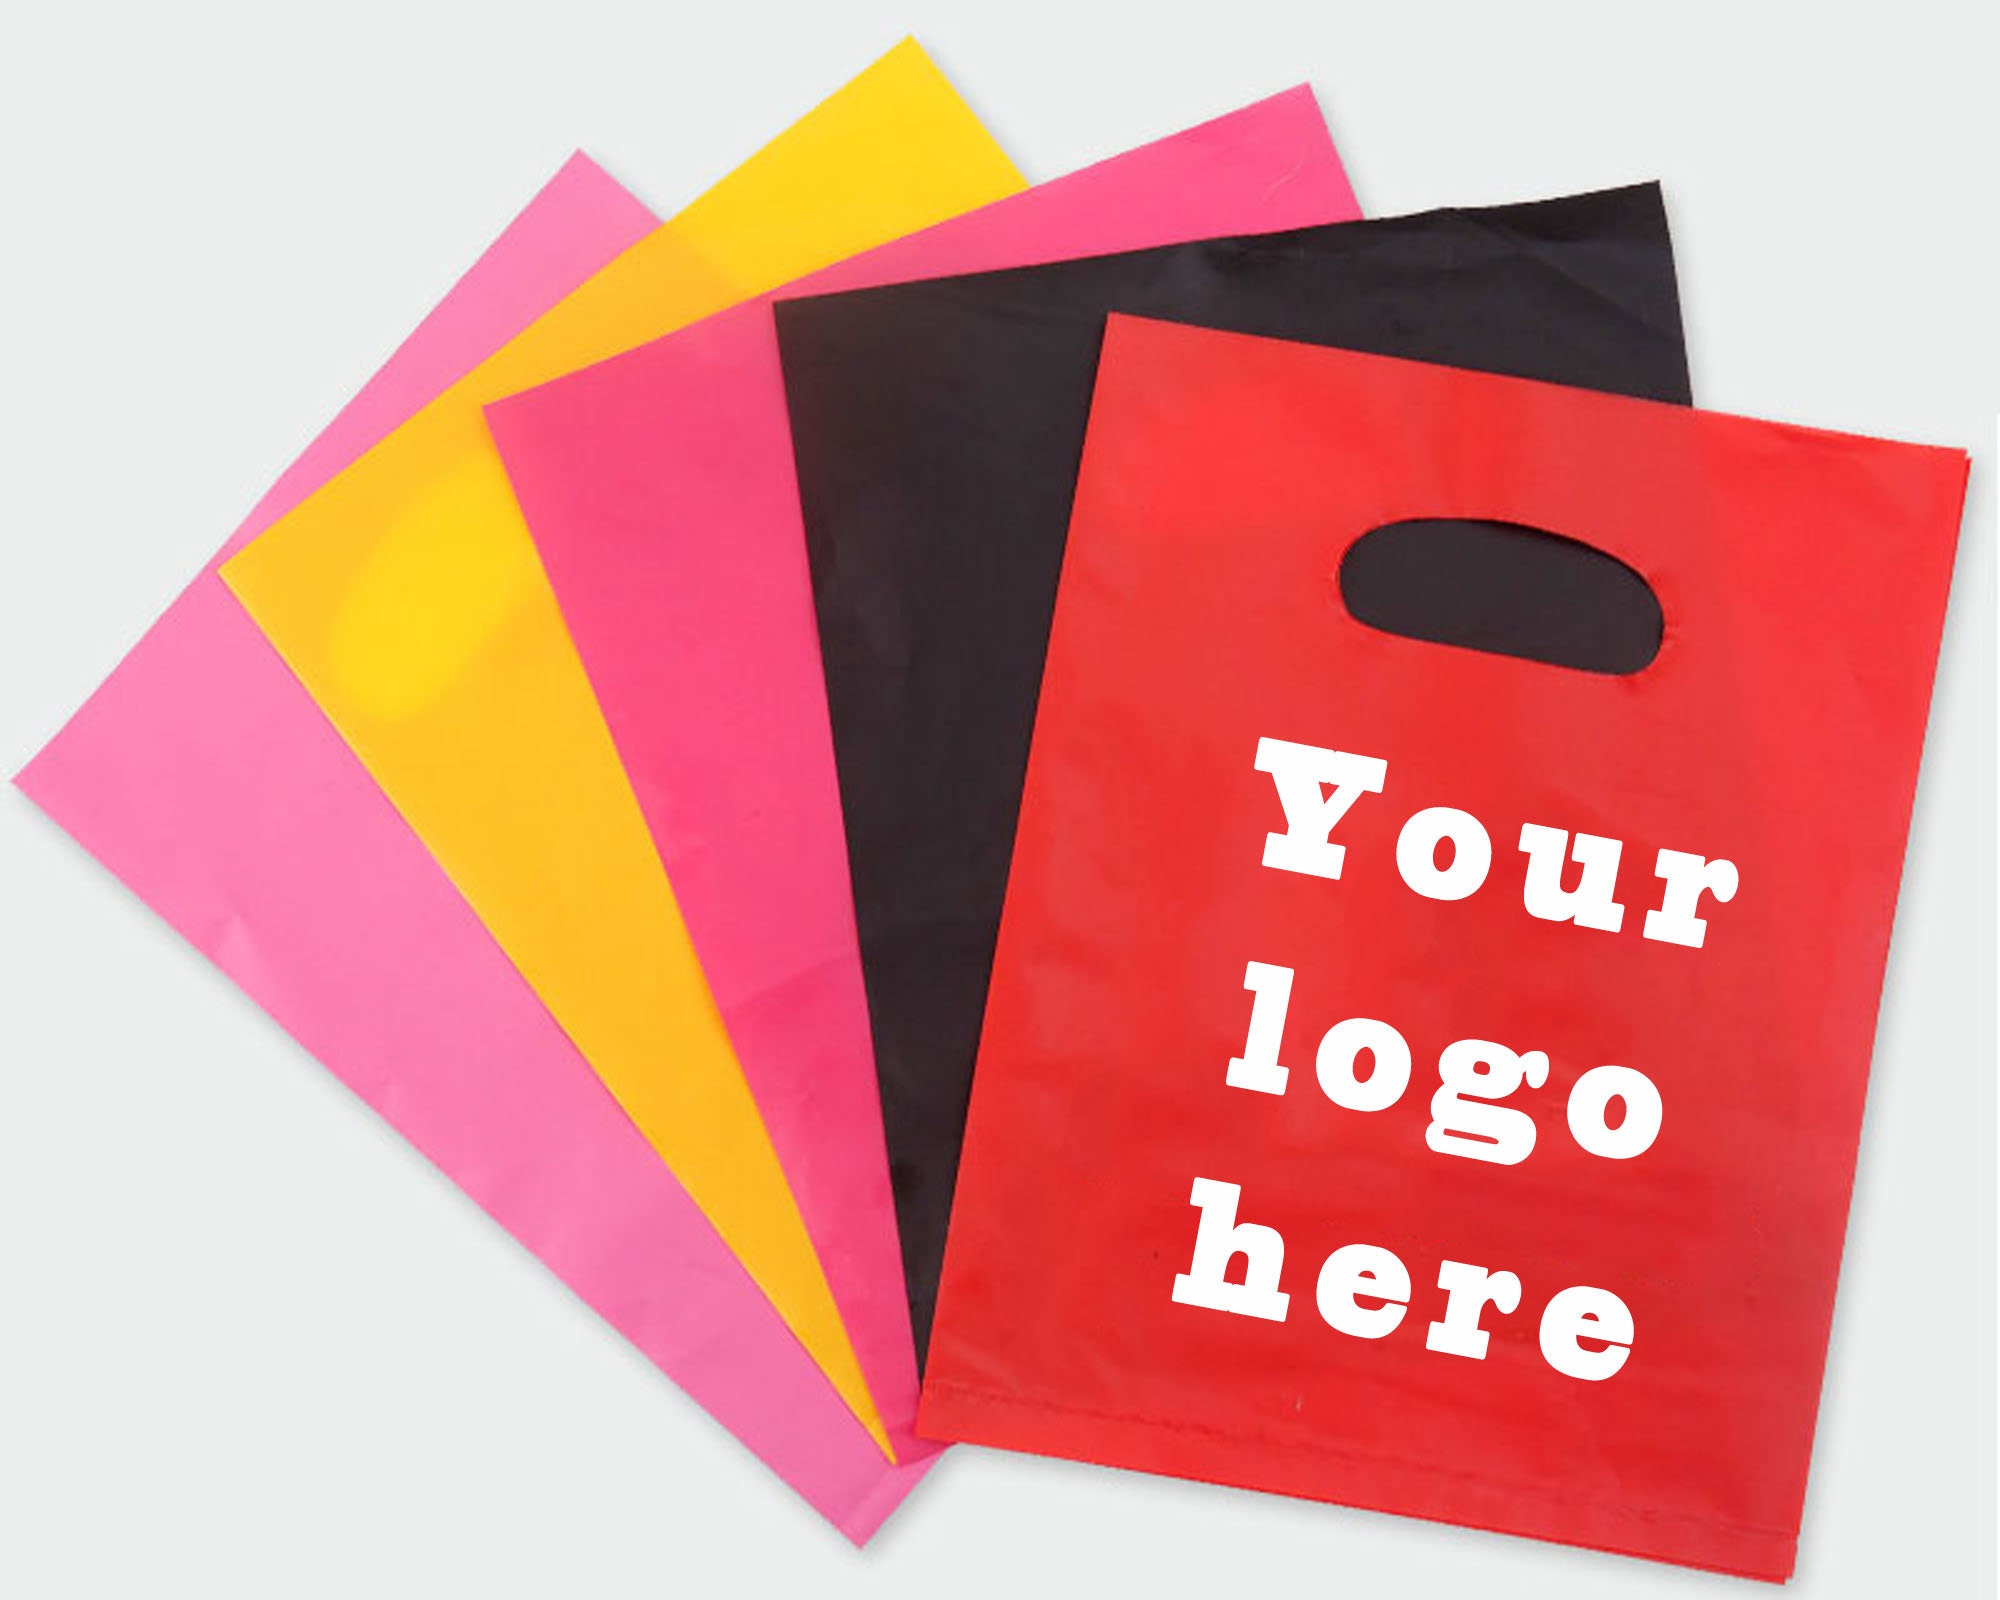 FCPTLP- Full Color Personalized Plastic Die-Cut Tote Bag (Multiple